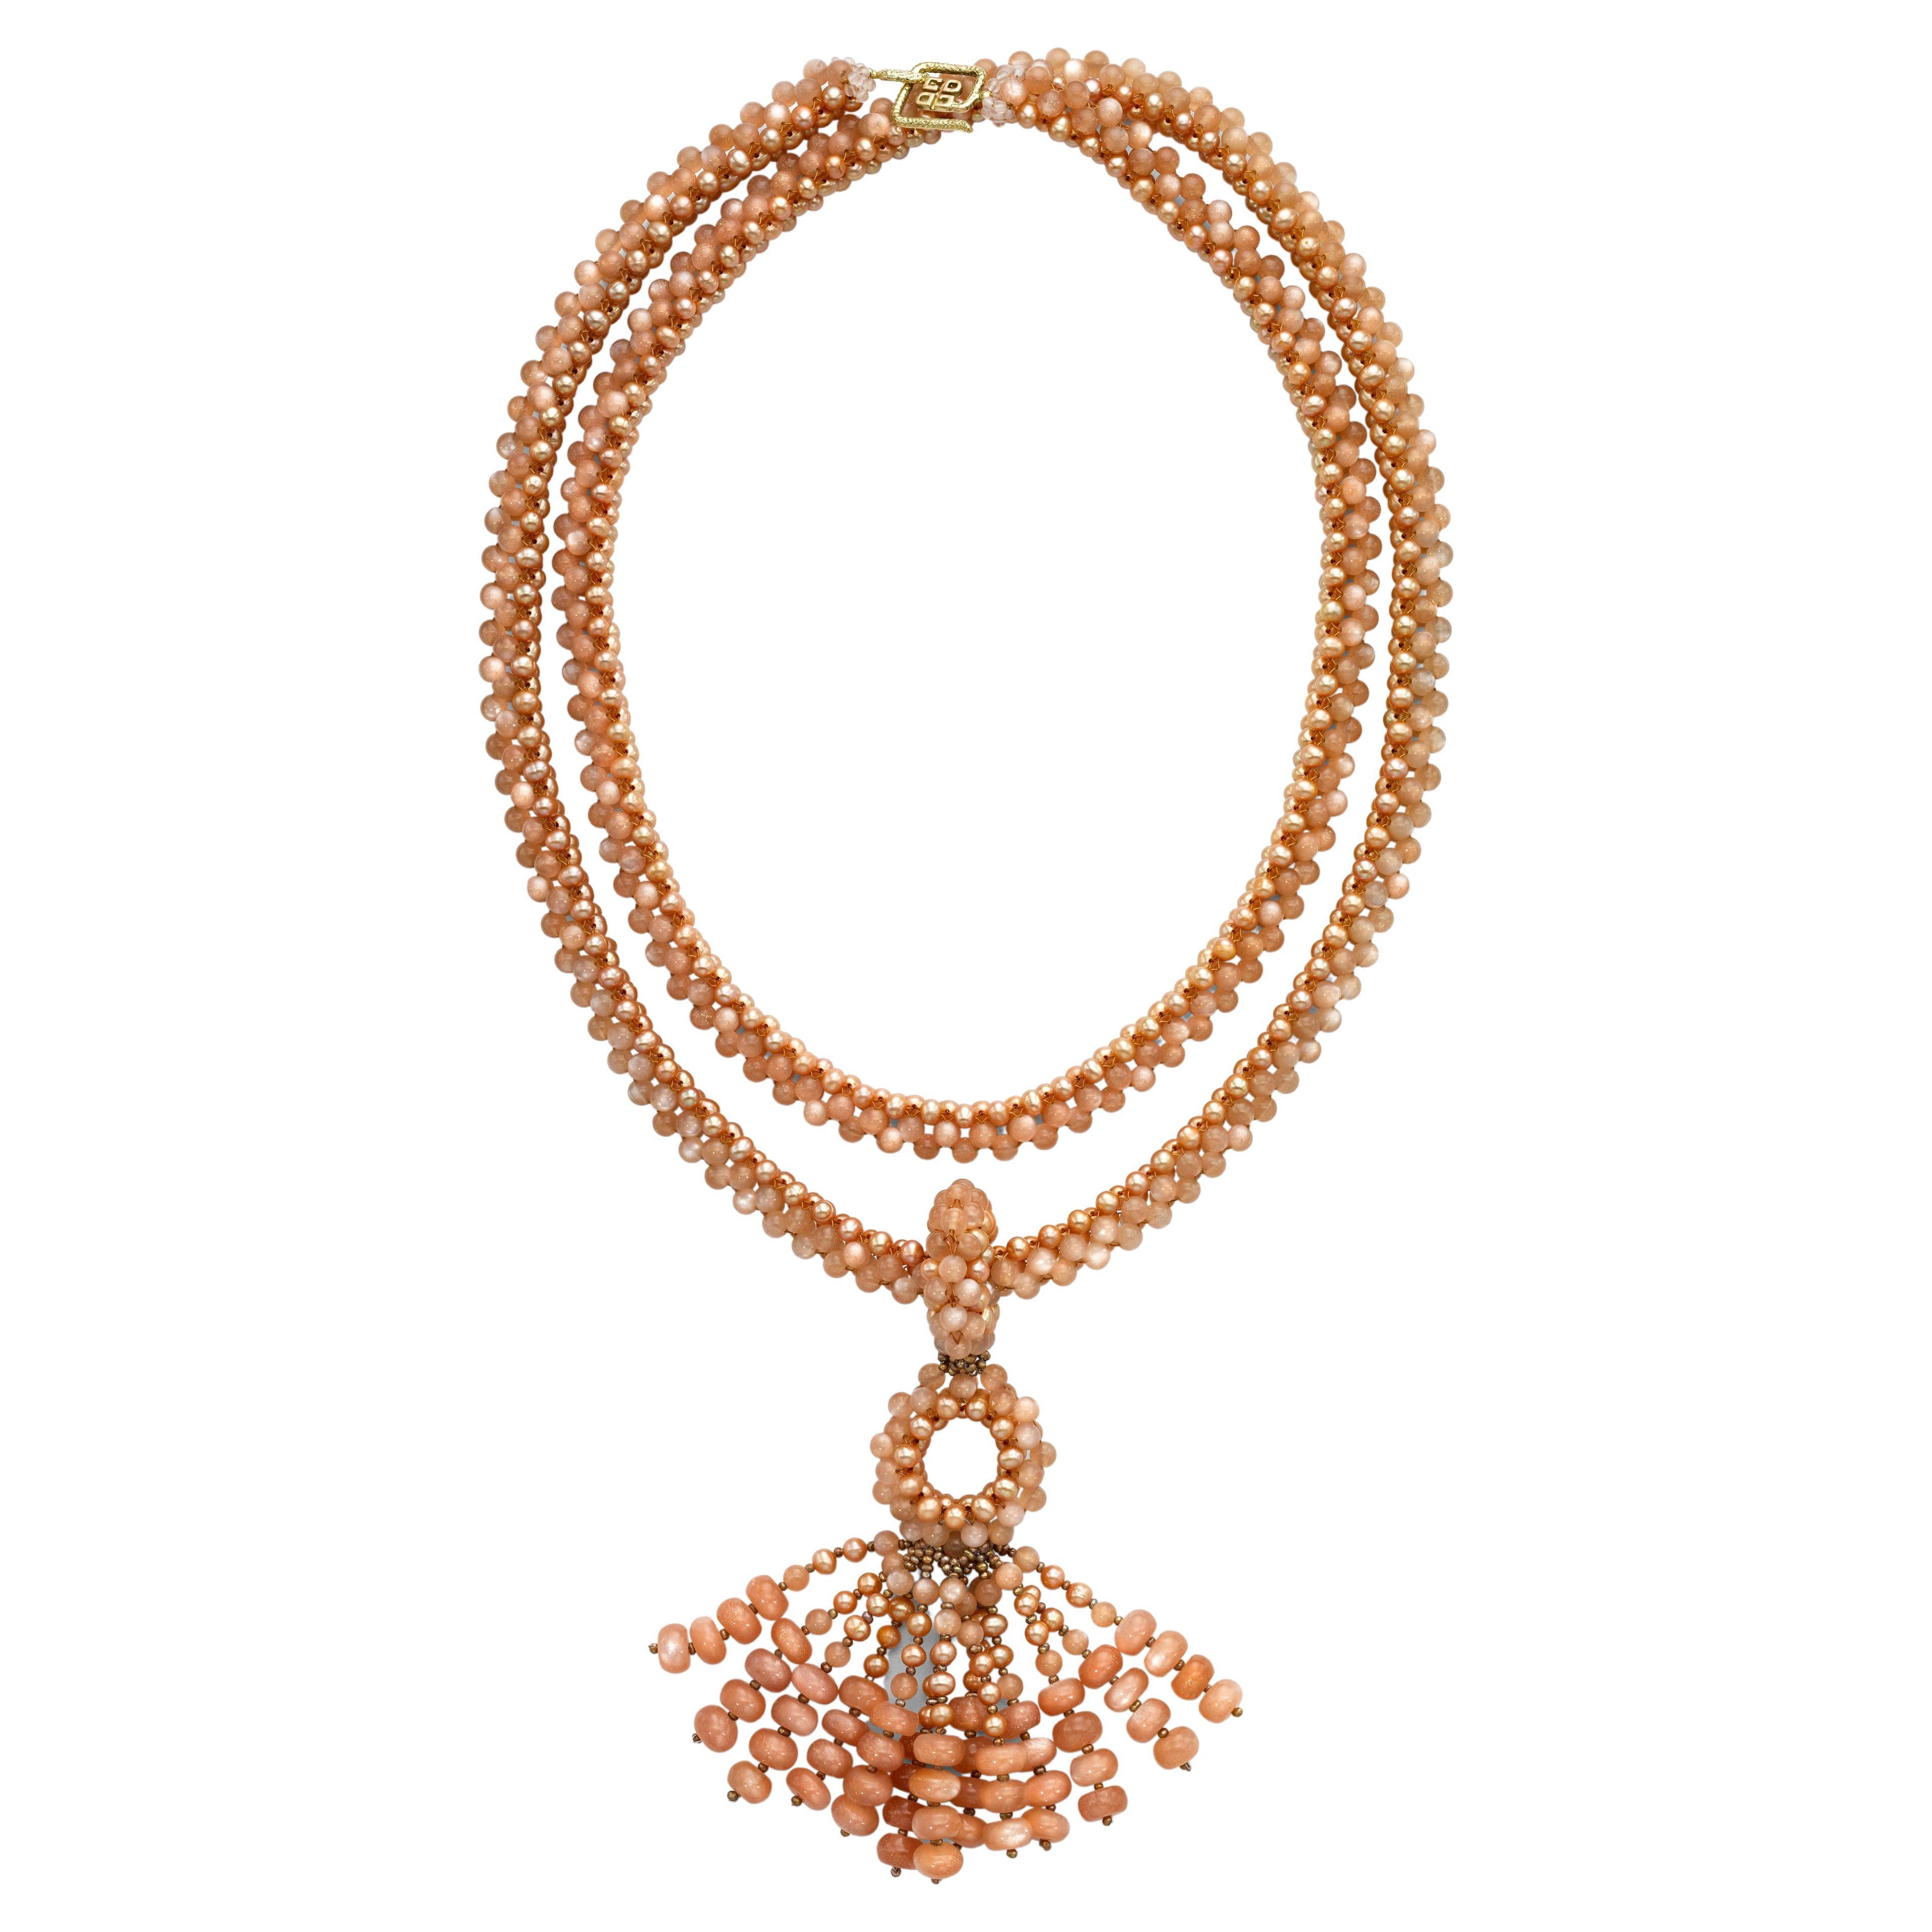 Long Beaded Rope Tassel Necklace in 18k Gold, Pink Pearls, and Peach Moonstone